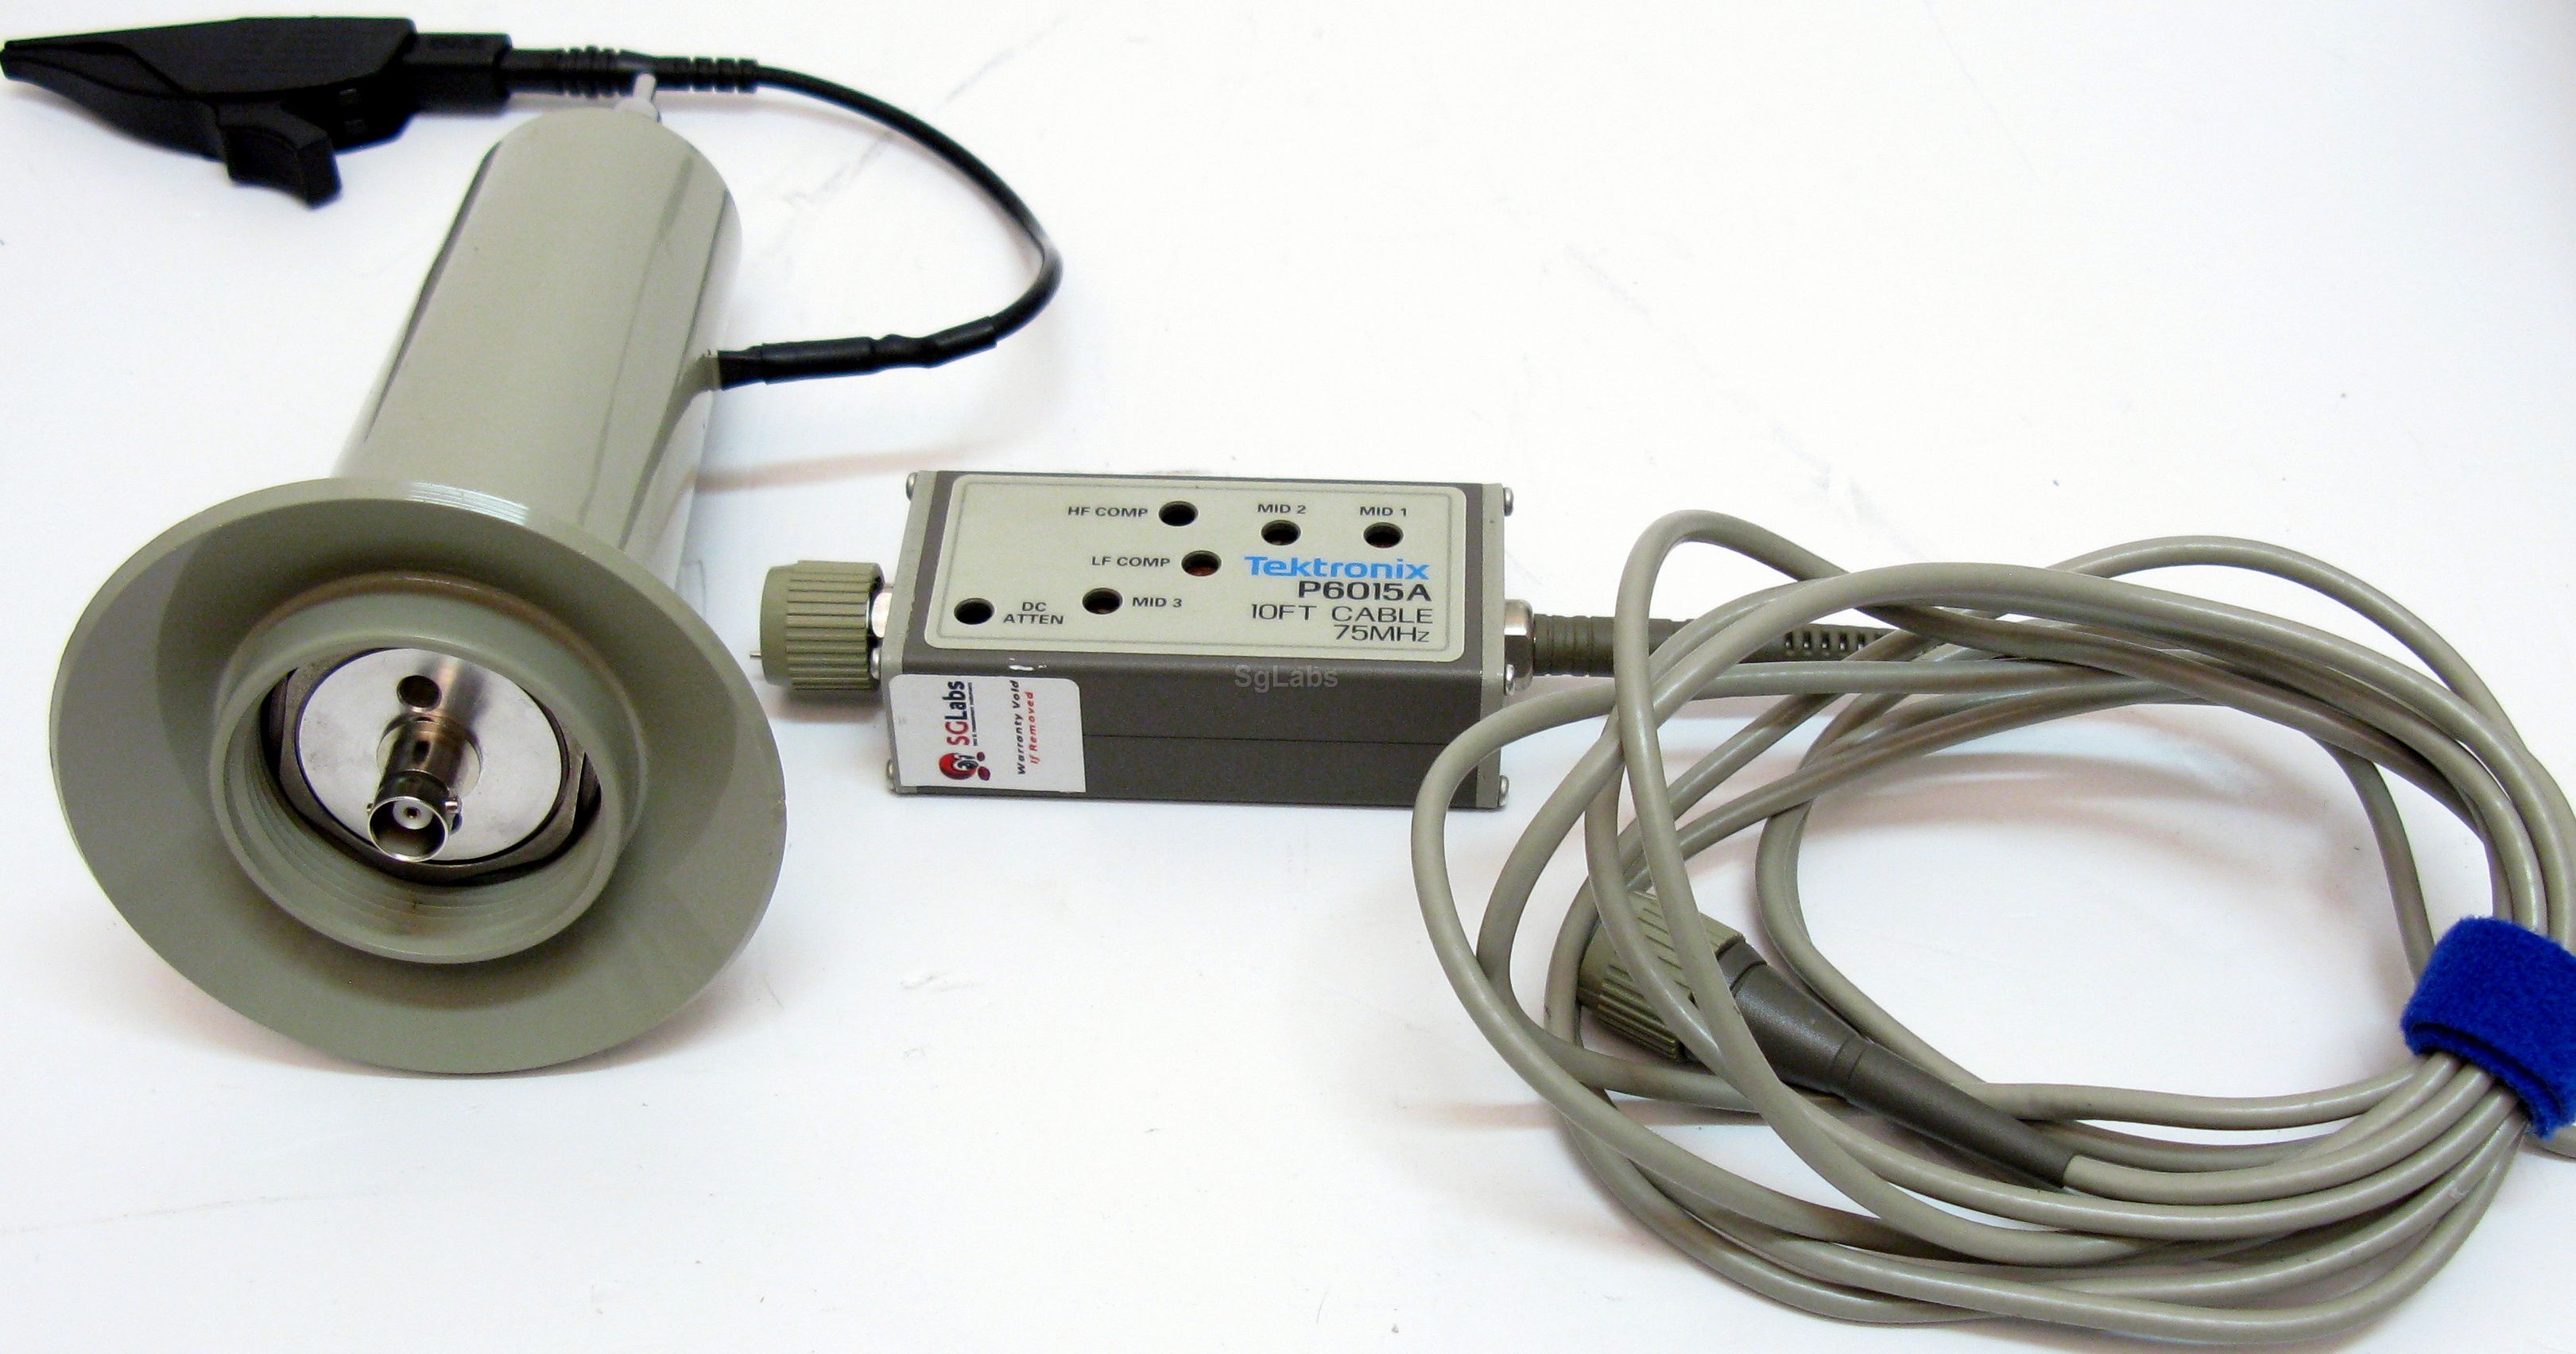 P6015A High Voltage Probe Tektronix Tested Fully Functional 